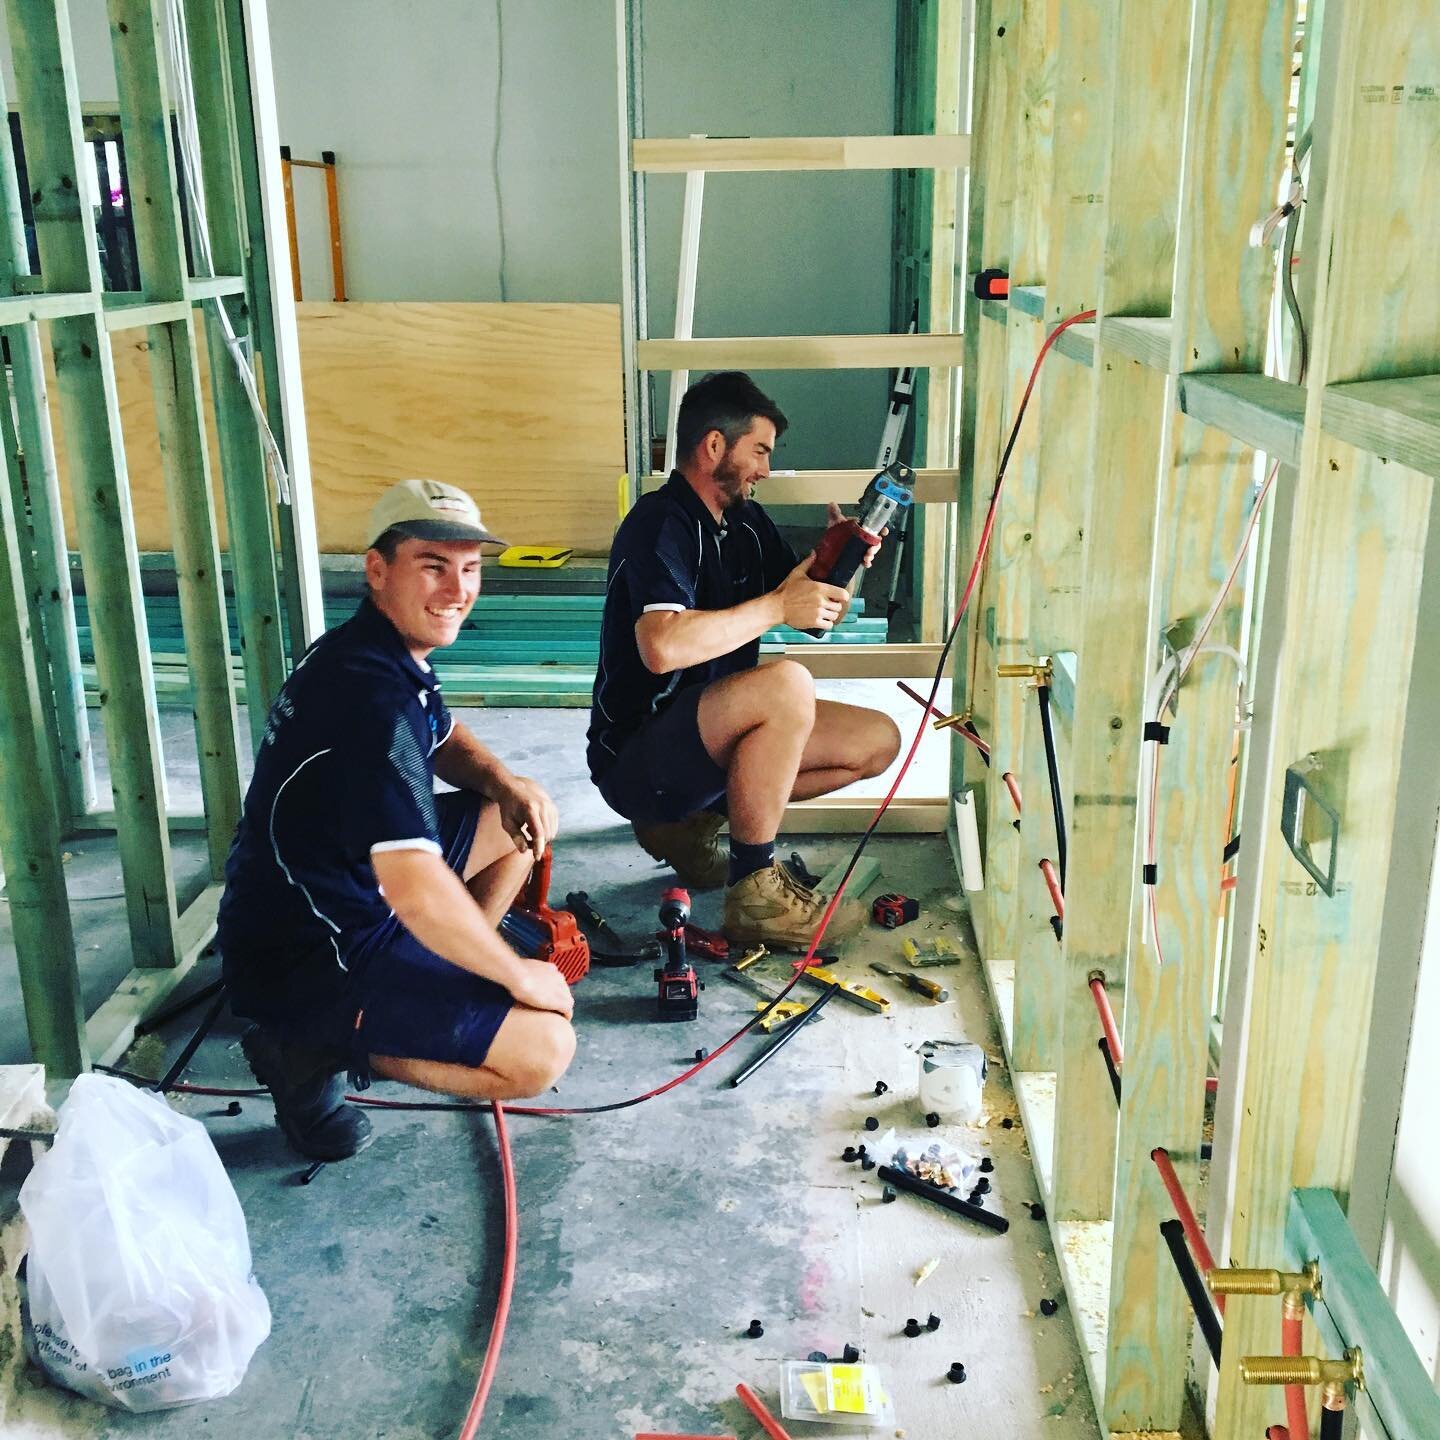 Jordan and the new apprentice Tom getting stuck into this renovation for @castwoodconstruction 💪🏼